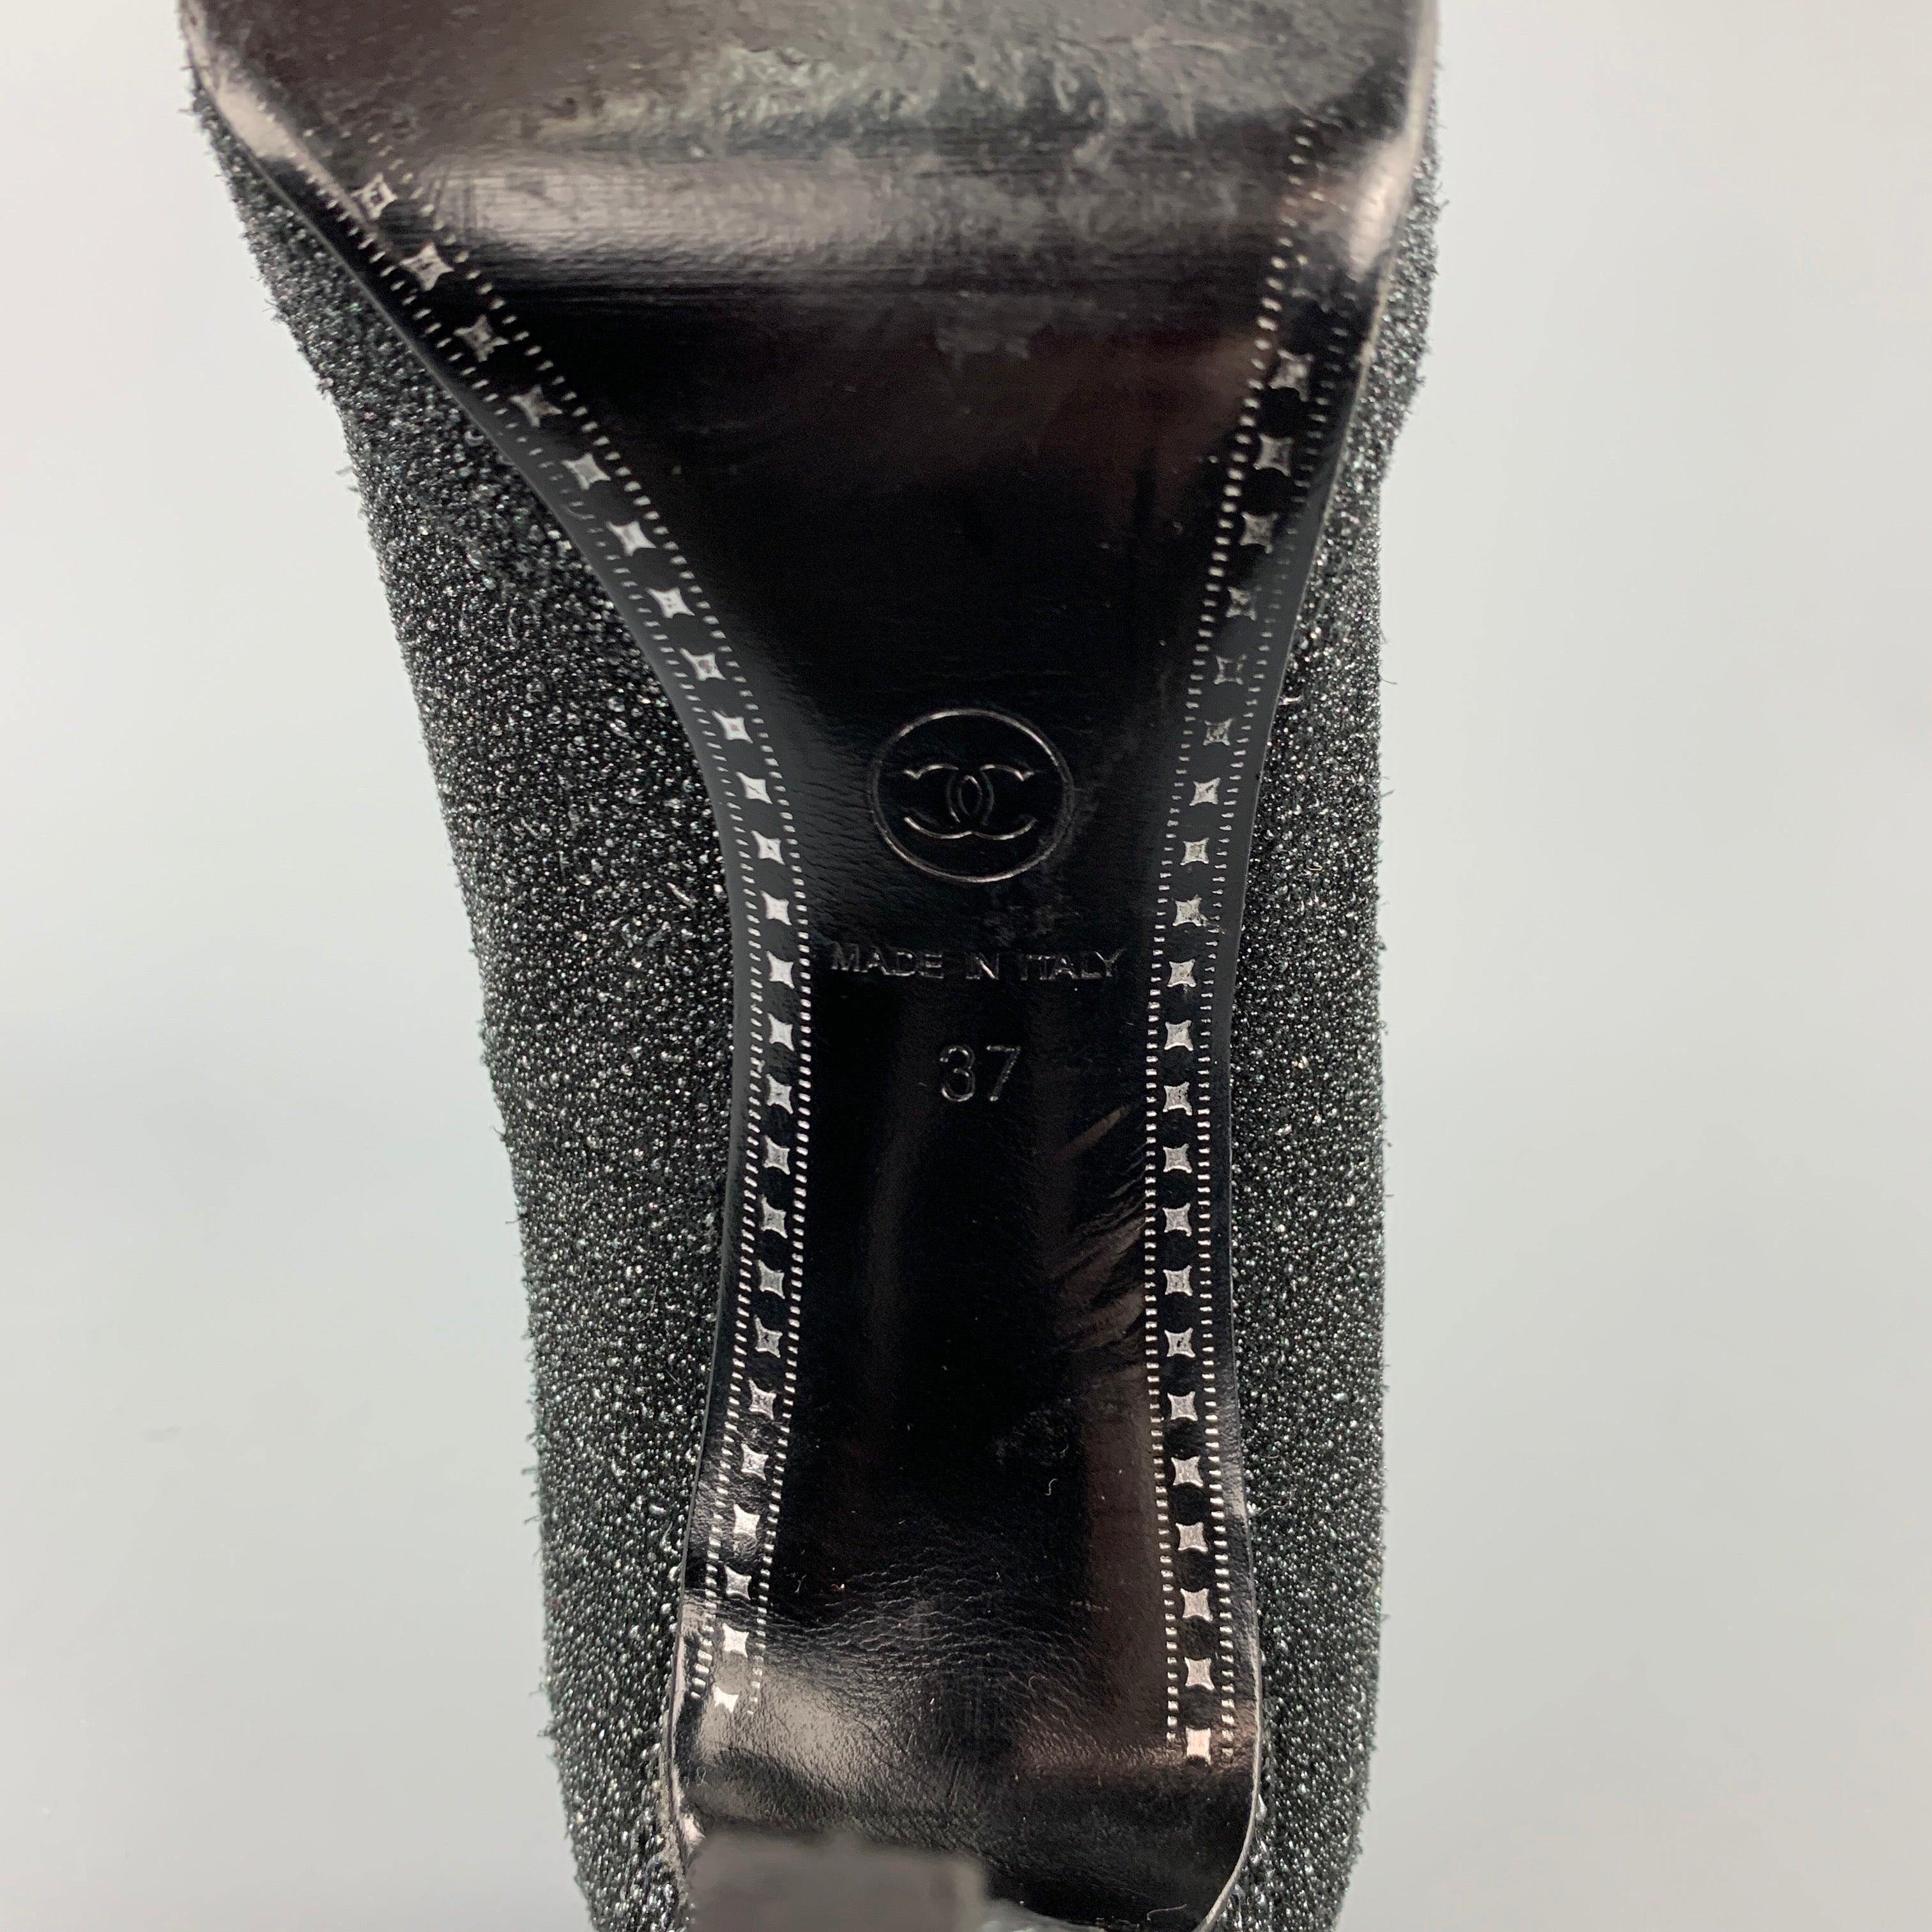 CHANEL Size 7 Charcoal & Grey Sparkle Textured Pumps For Sale 5